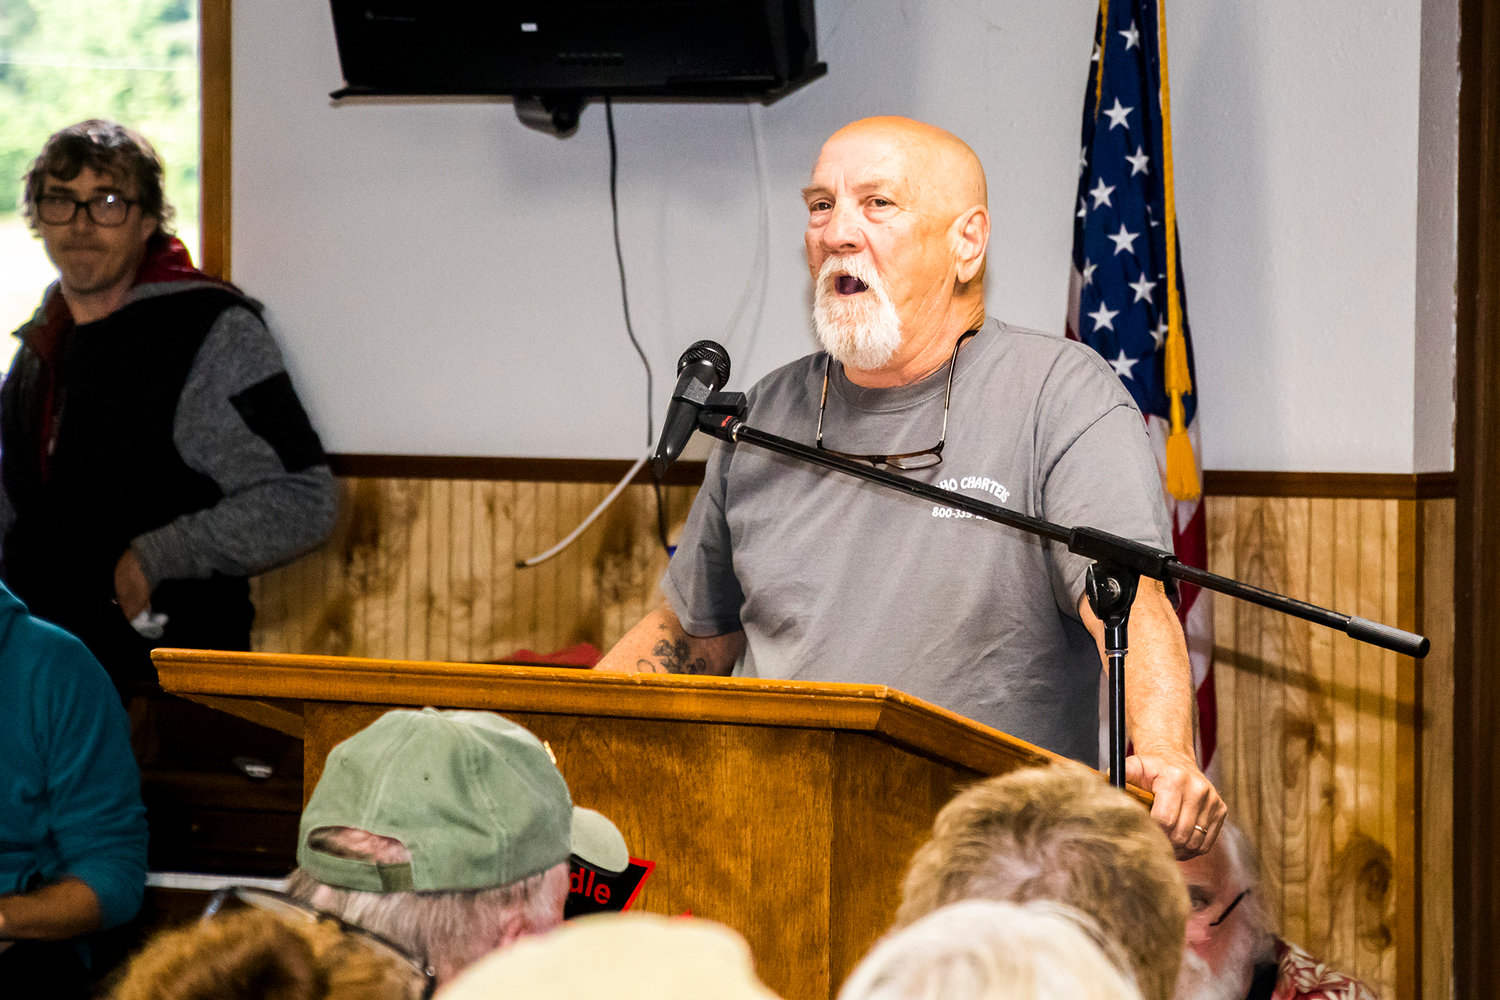 Greg King, vice president of Friends of the Cowlitz, a fishing advocacy group, addresses a packed house at the Randle Fire Hall to oppose a proposed water bottling plant.